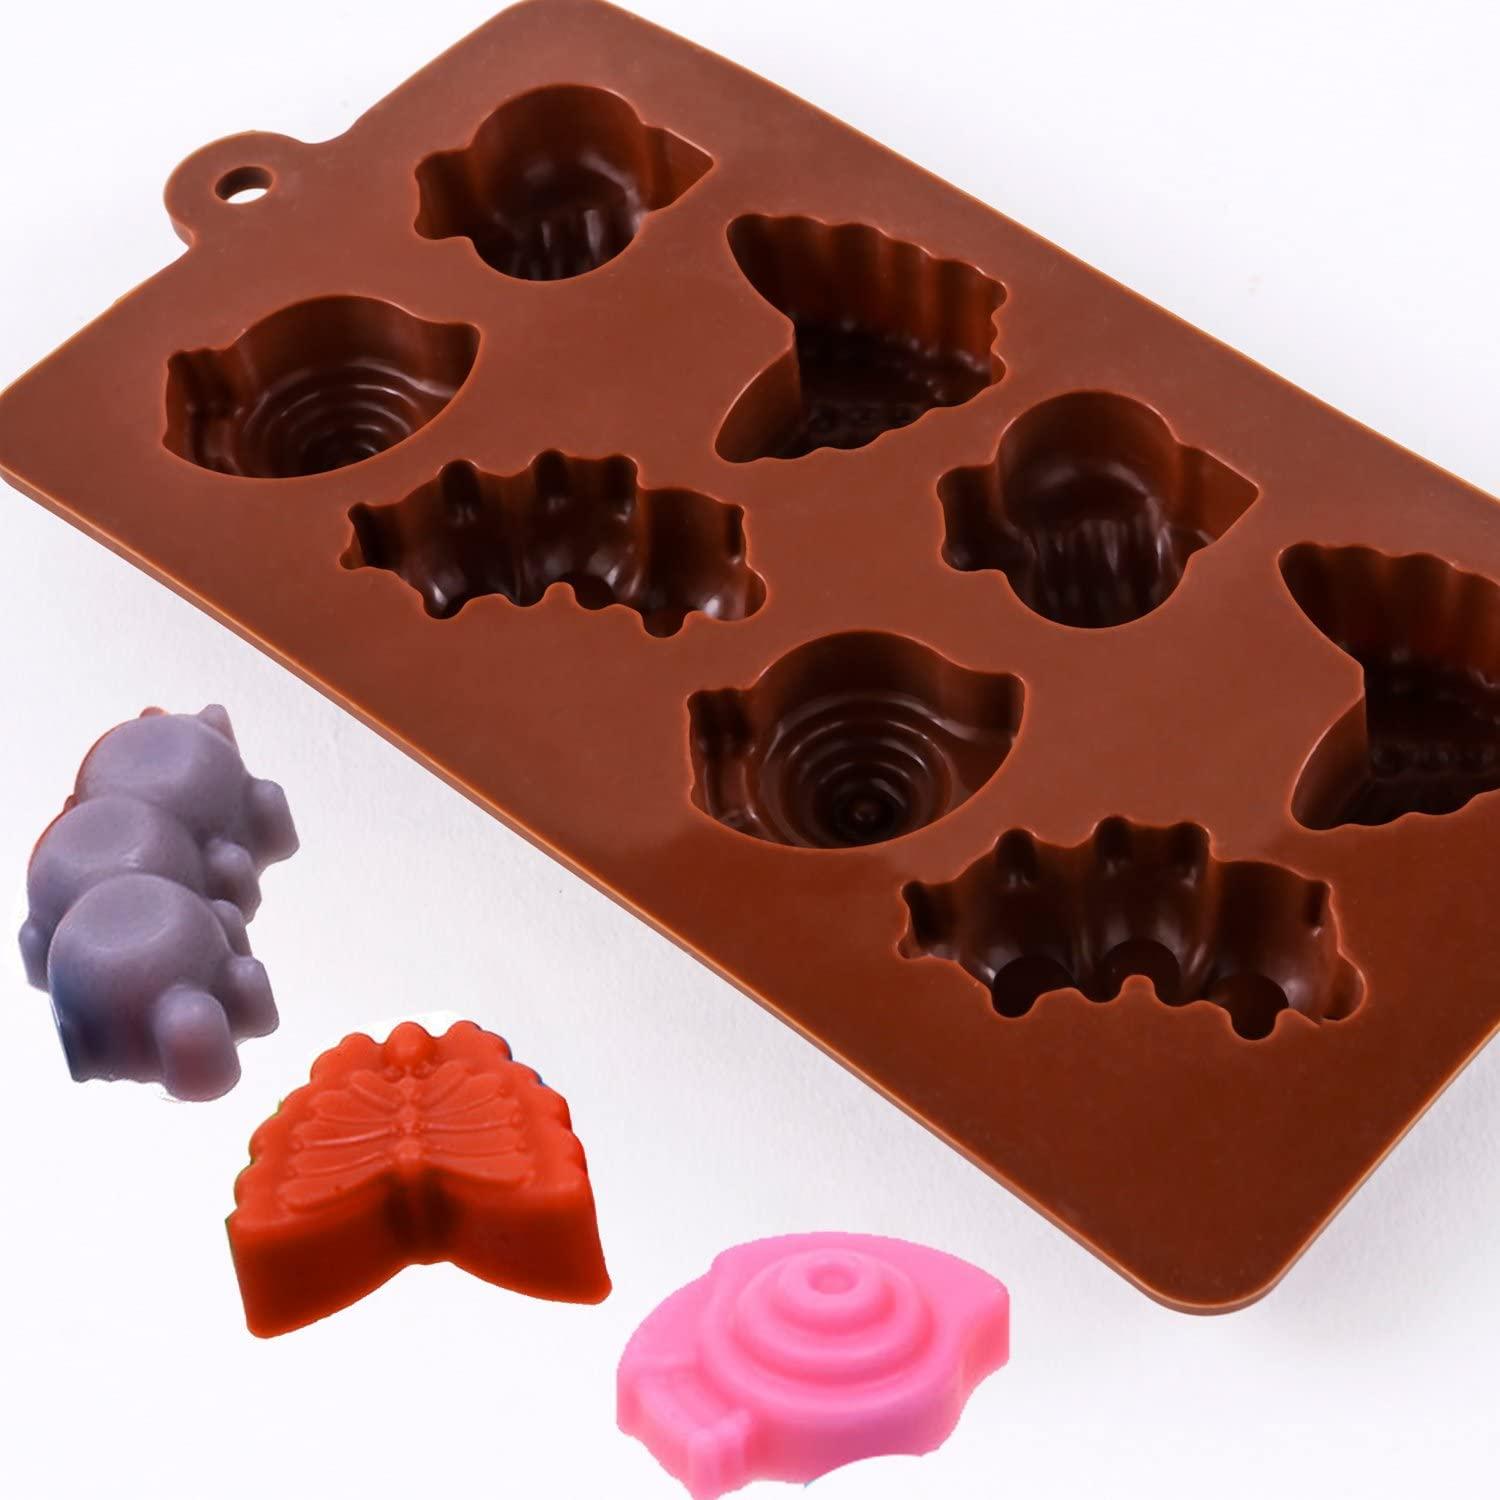 STARUBY Silicone Molds Non-stick Chocolate Candy Mold,Soap Molds,Silicone  Baking mold Making Kit, Set of 3 Forest Theme with Different Shapes